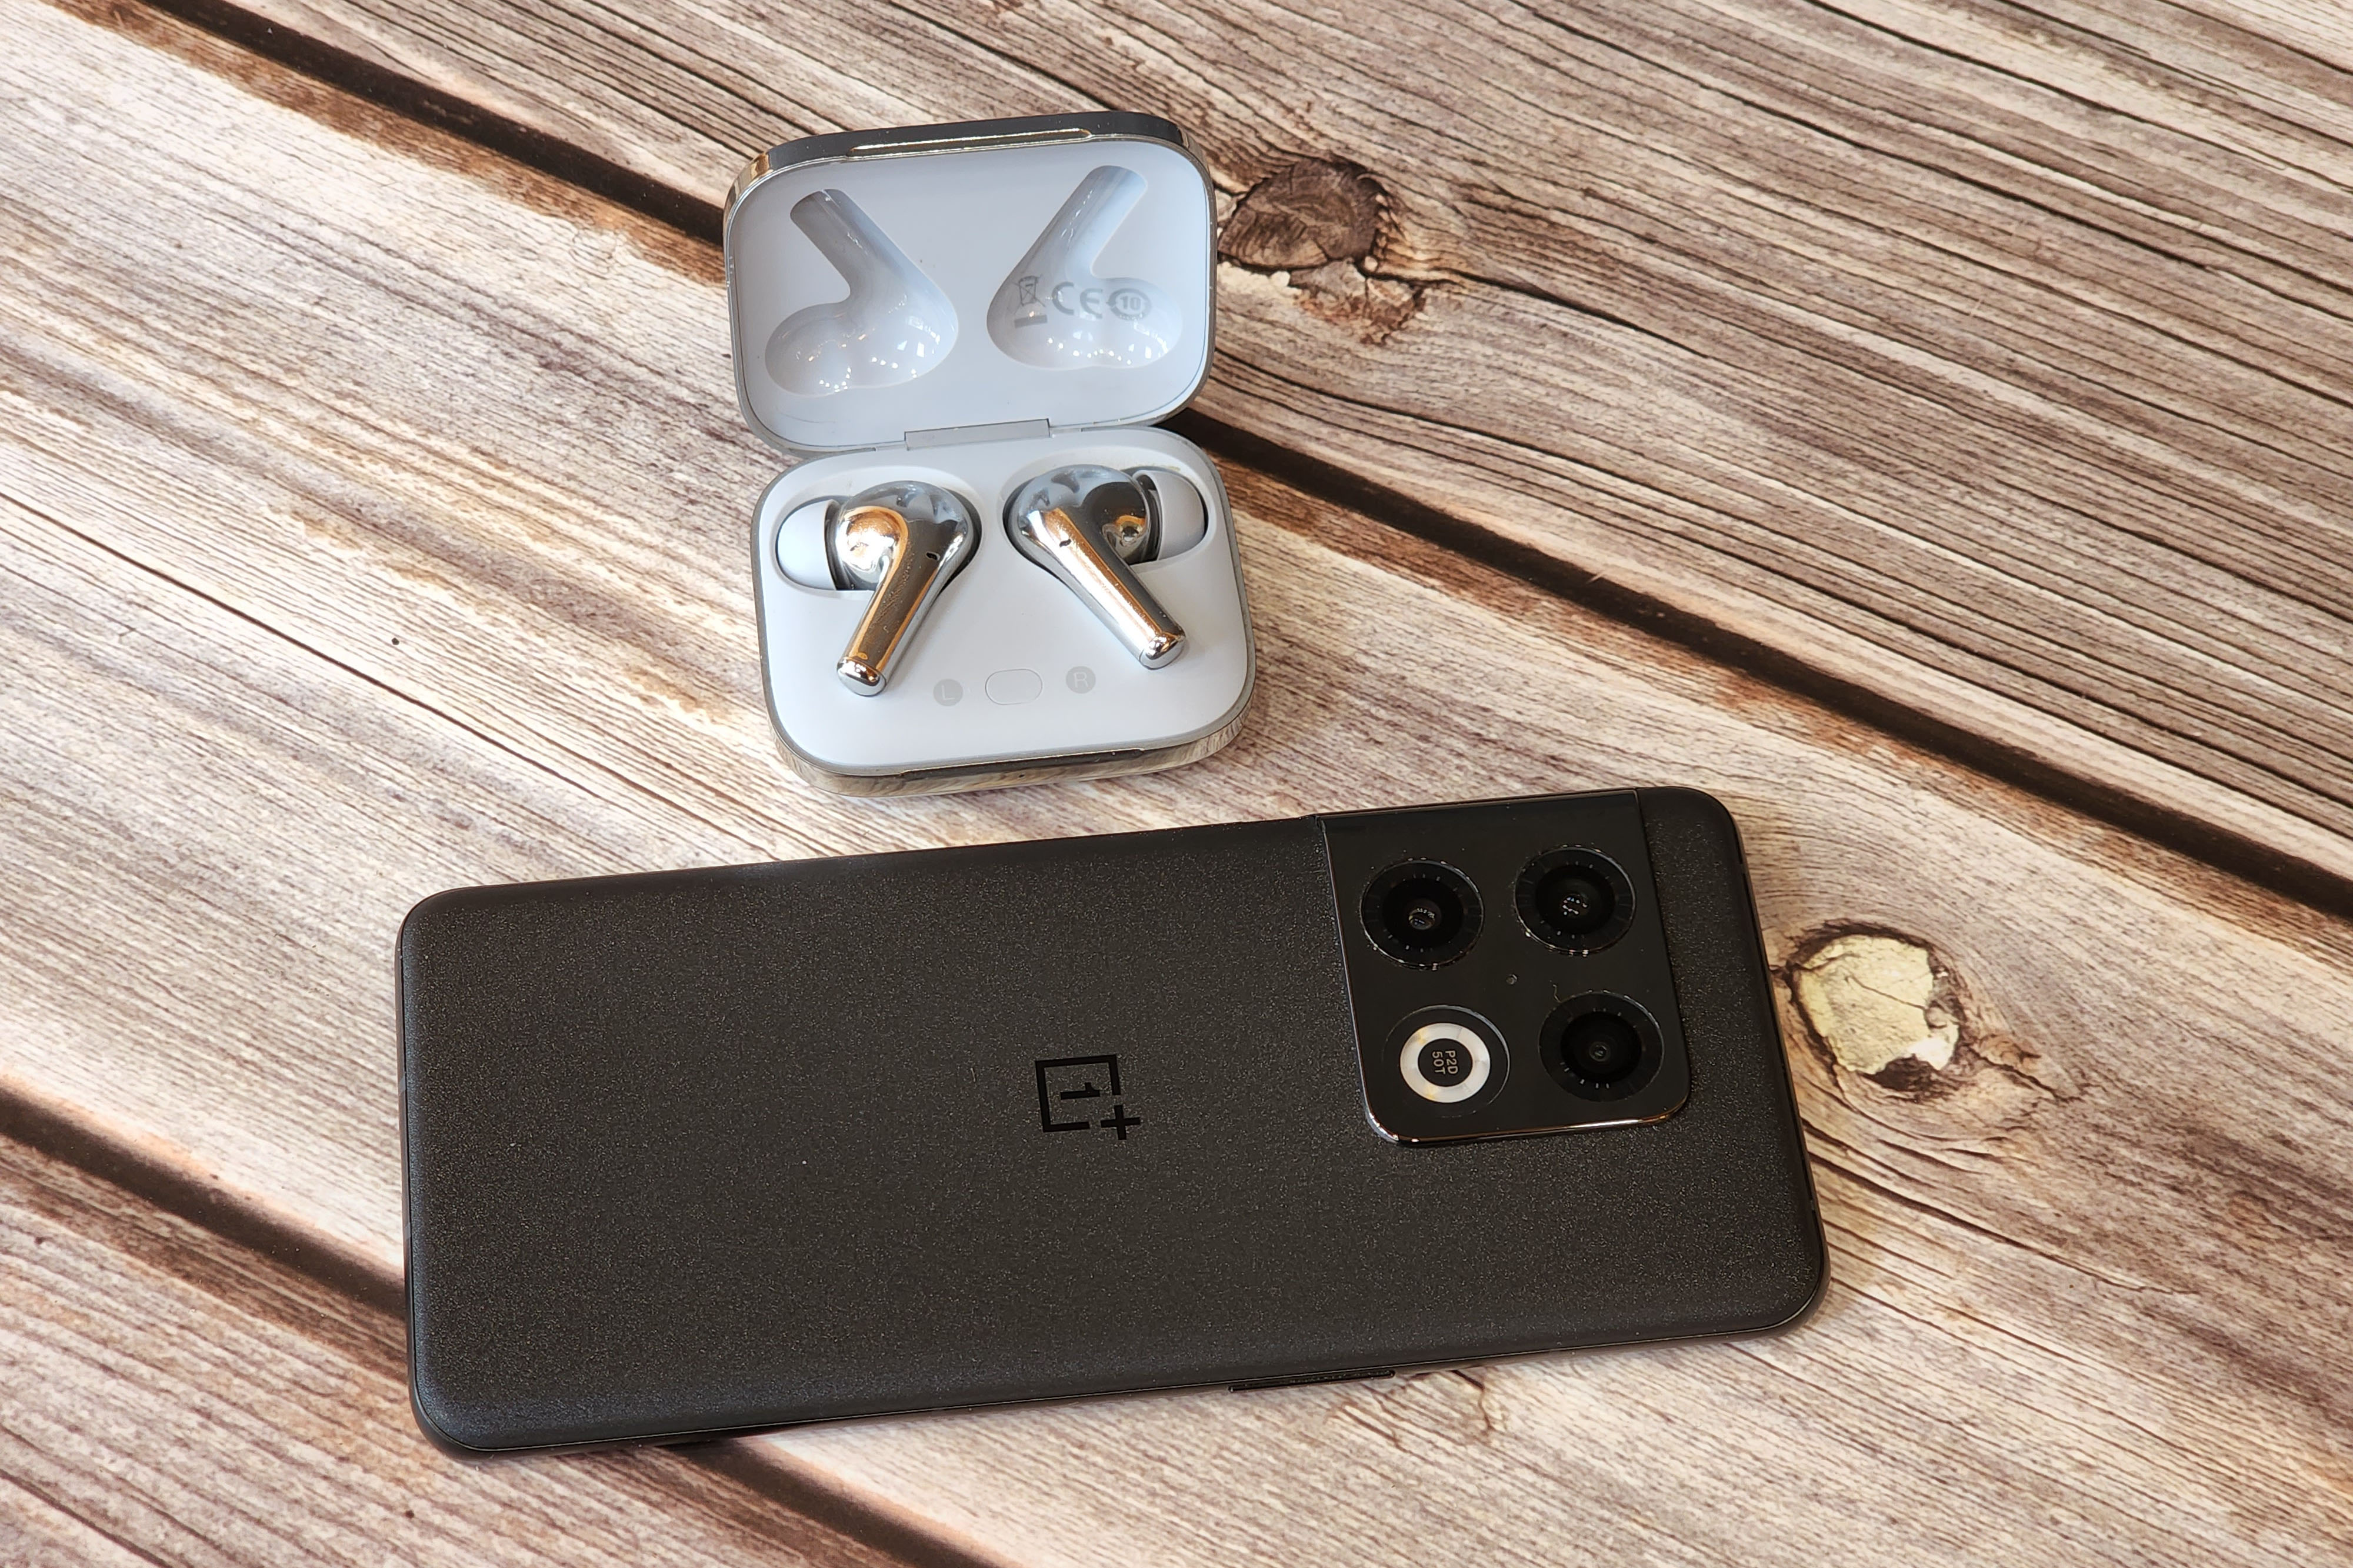 OnePlus Buds Pro review: Good buds with a few flaws